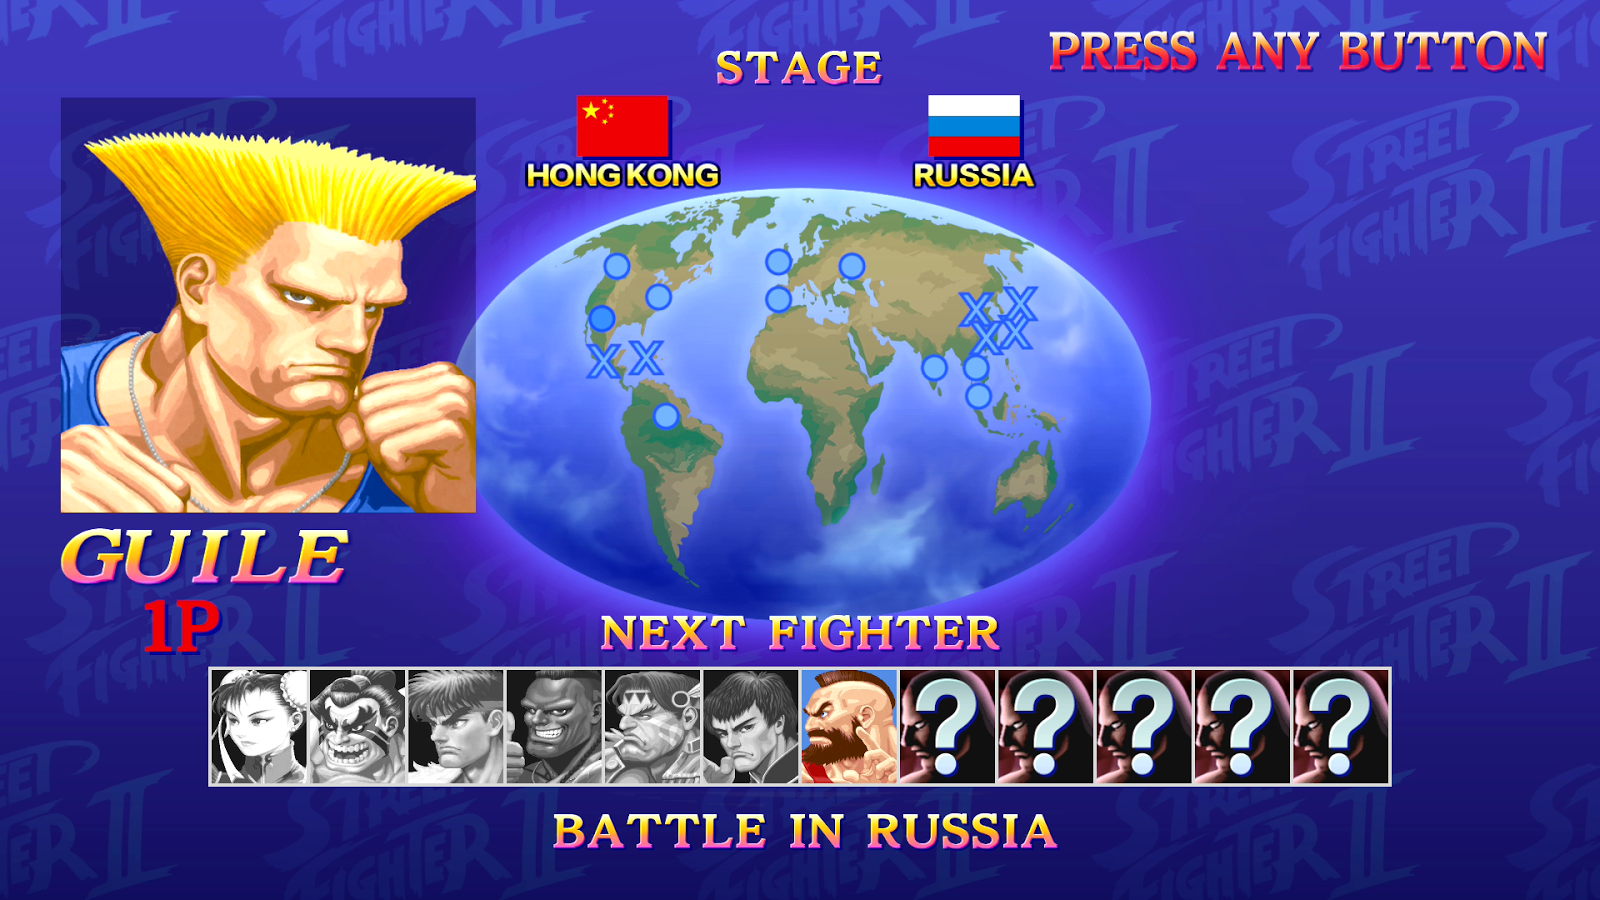 Ultra Street Fighter 2: The Final Challengers review